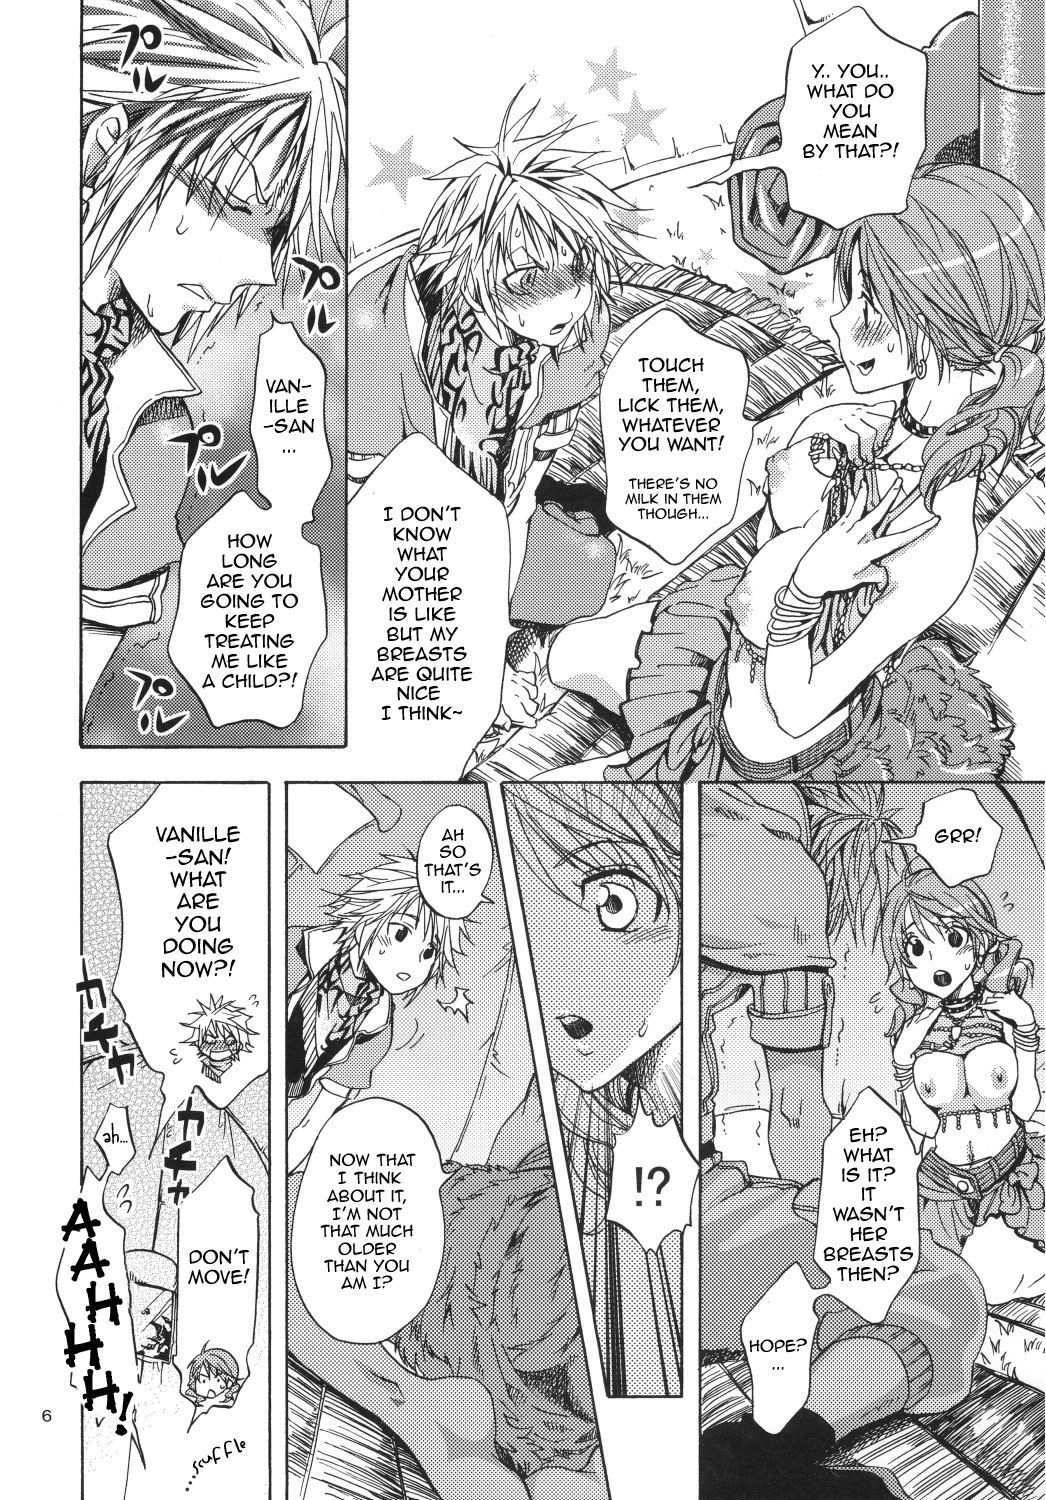 [Kurionesha] On Holiday With l&#039;Cie and Friends [Eng] (FF13) {doujin-moe.us} 